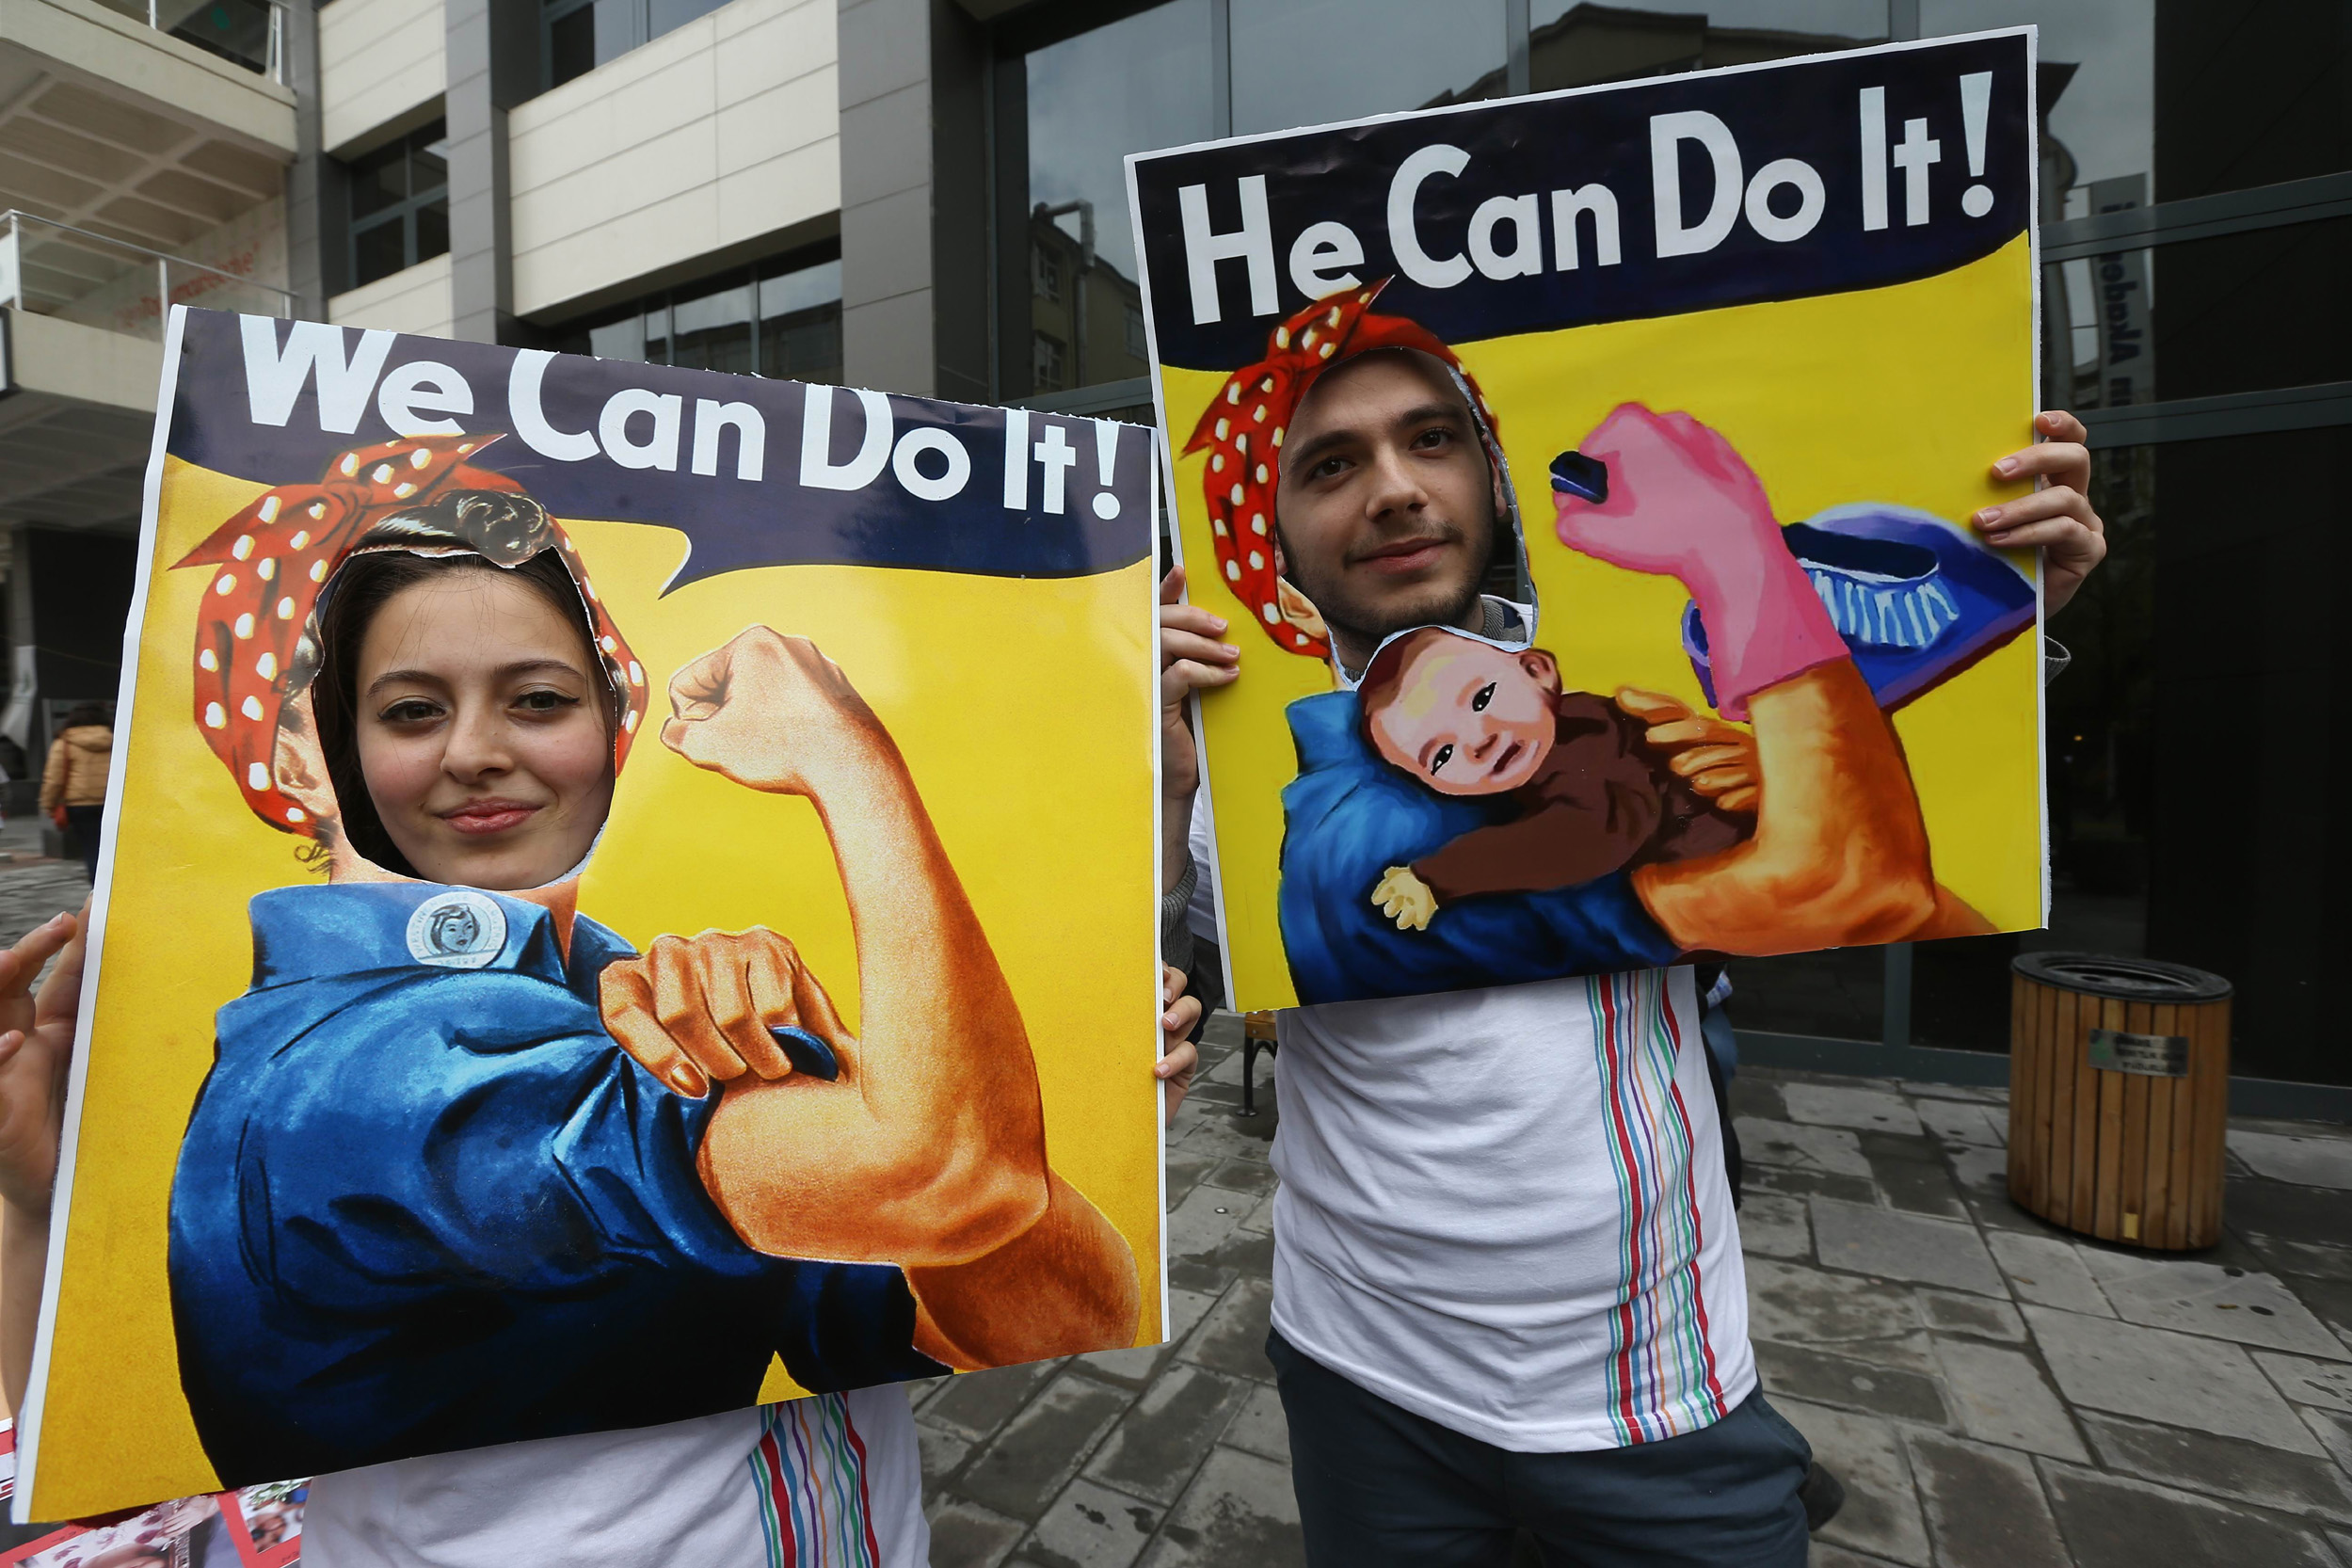 A couple pose for a picture parodying the "We can do it" American propaganda poster during a march in central Ankara as part of the "International Women's Day", on March 8, 2014. The "International Women's Day" dates back to the beginning of the 20th Century and has been observed by the United Nations since 1975. AFP PHOTO/ADEM ALTAN        (Photo credit should read ADEM ALTAN/AFP/Getty Images) (ADEM ALTAN&mdash;AFP/Getty Images)